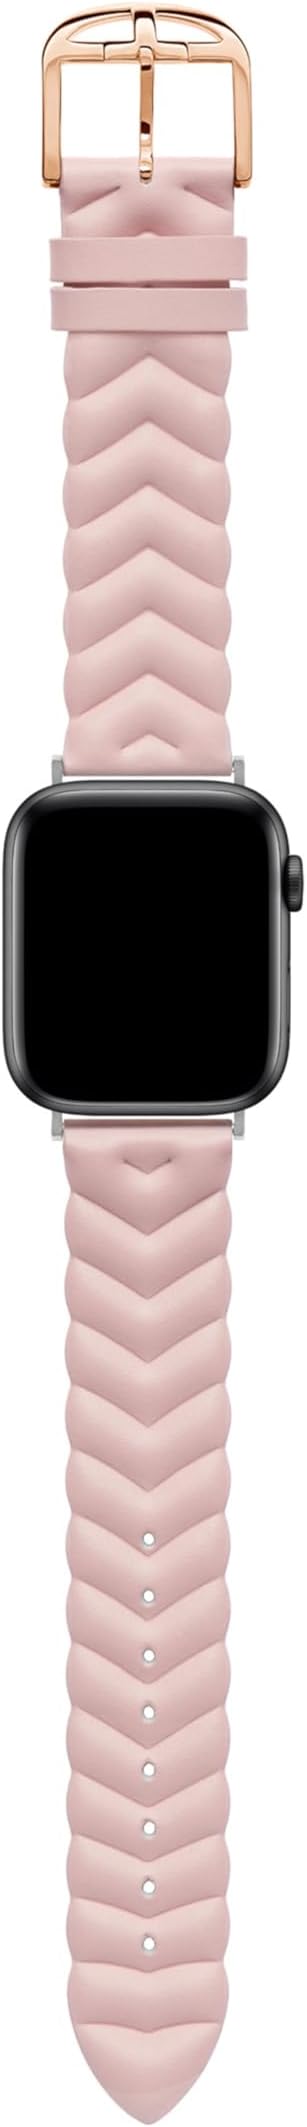 Ted Baker Strap for Apple Watch - BKS38F111